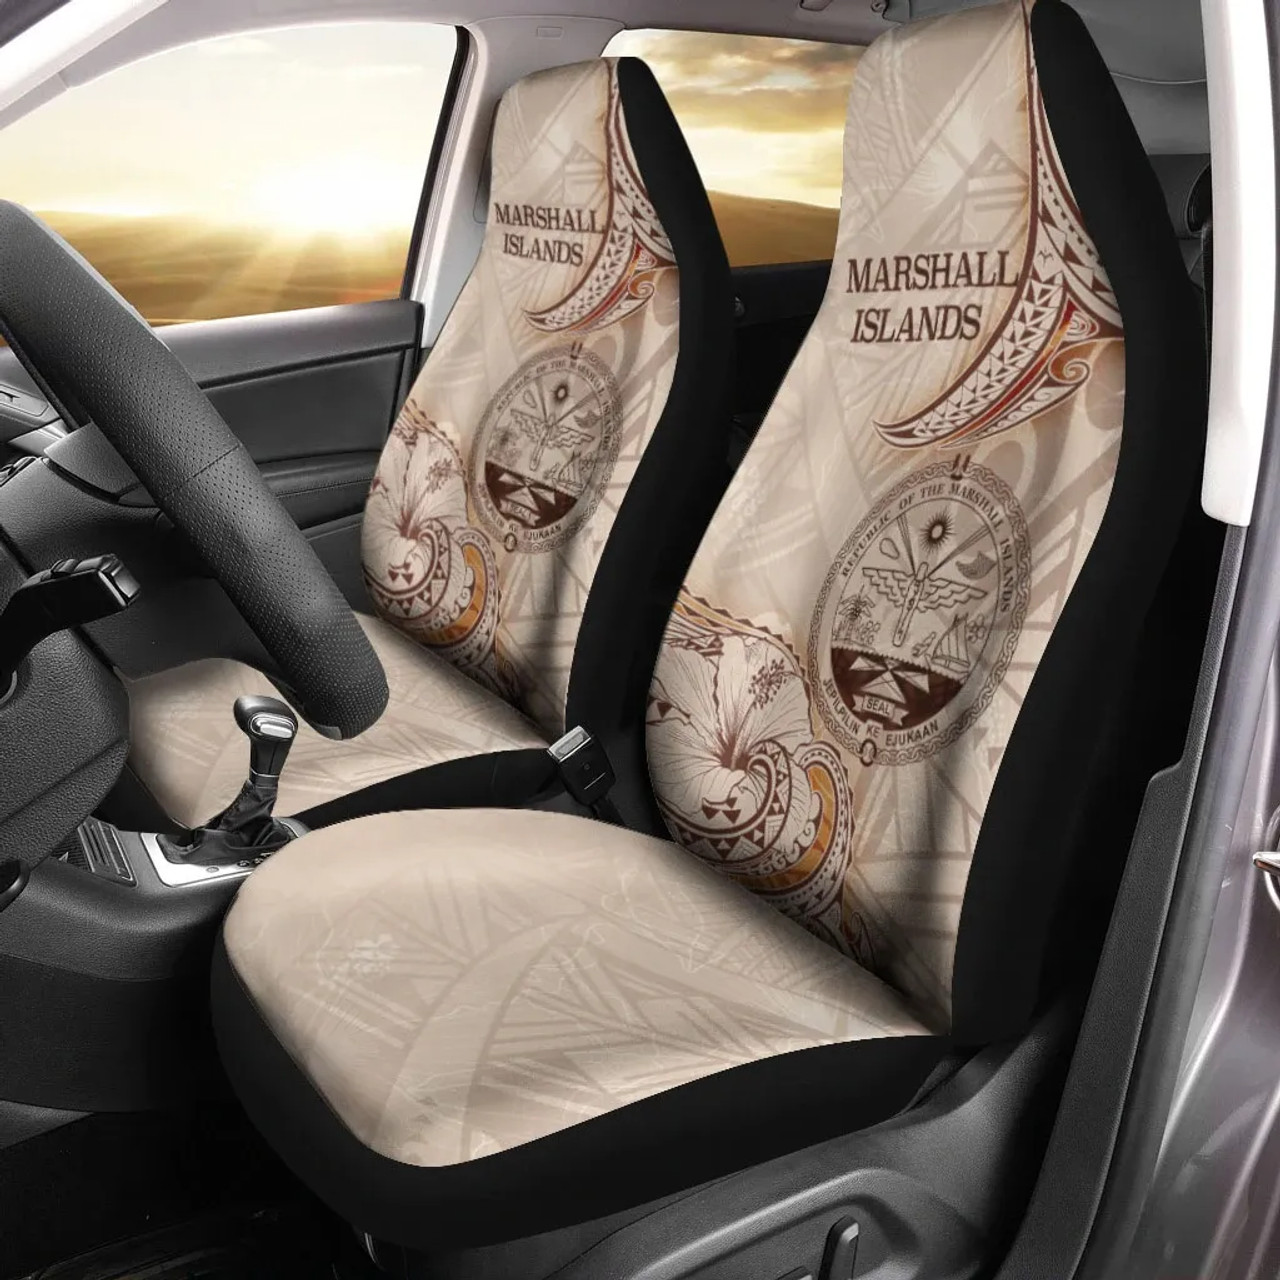 Marshall Islands Car Seat Cover - Hibiscus Flowers Vintage Style